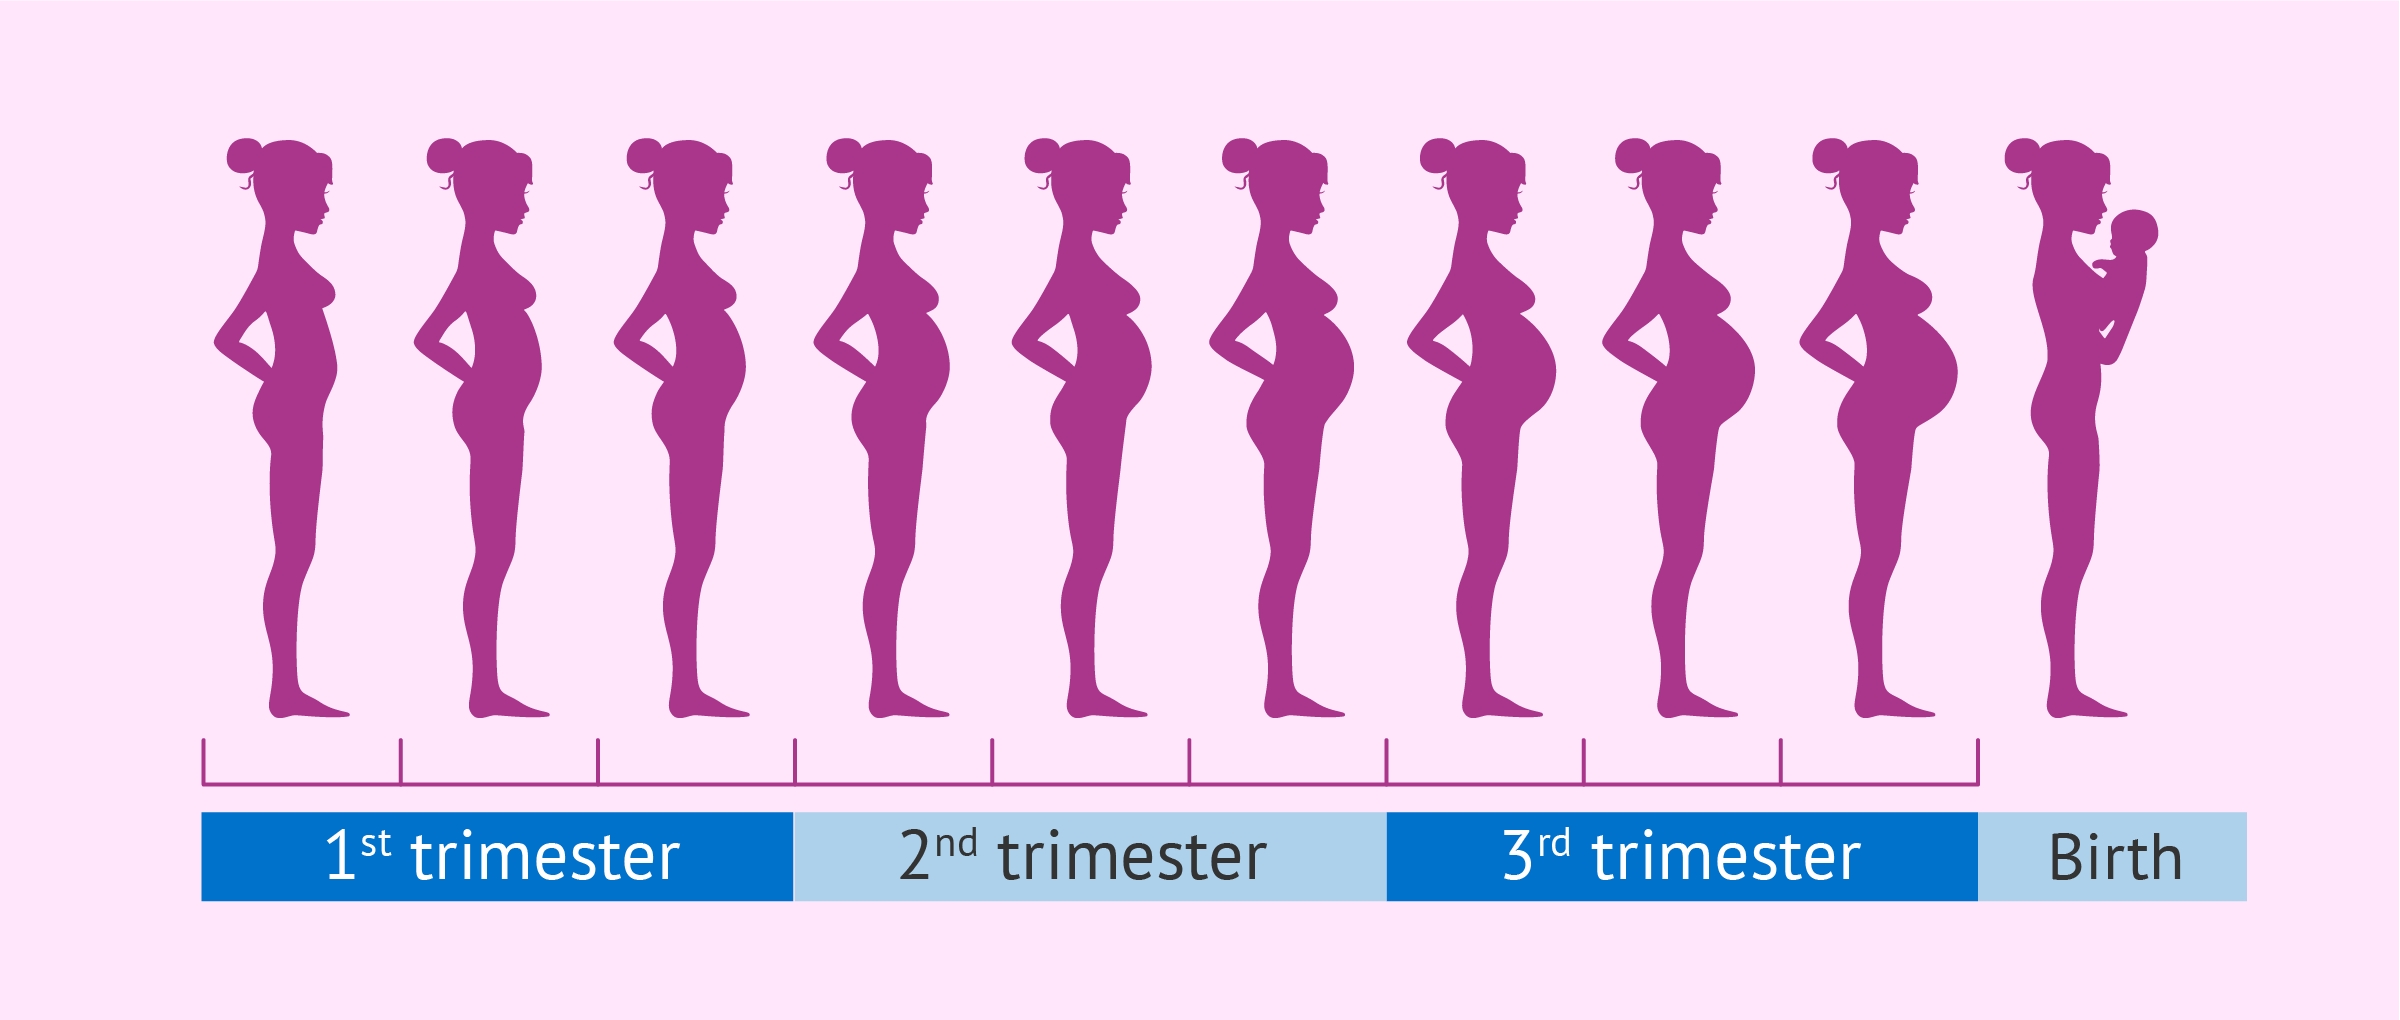 Pregnancy Stagesmonth - Fetal Development With Pictures throughout Pregnancy Stages Months And Weeks